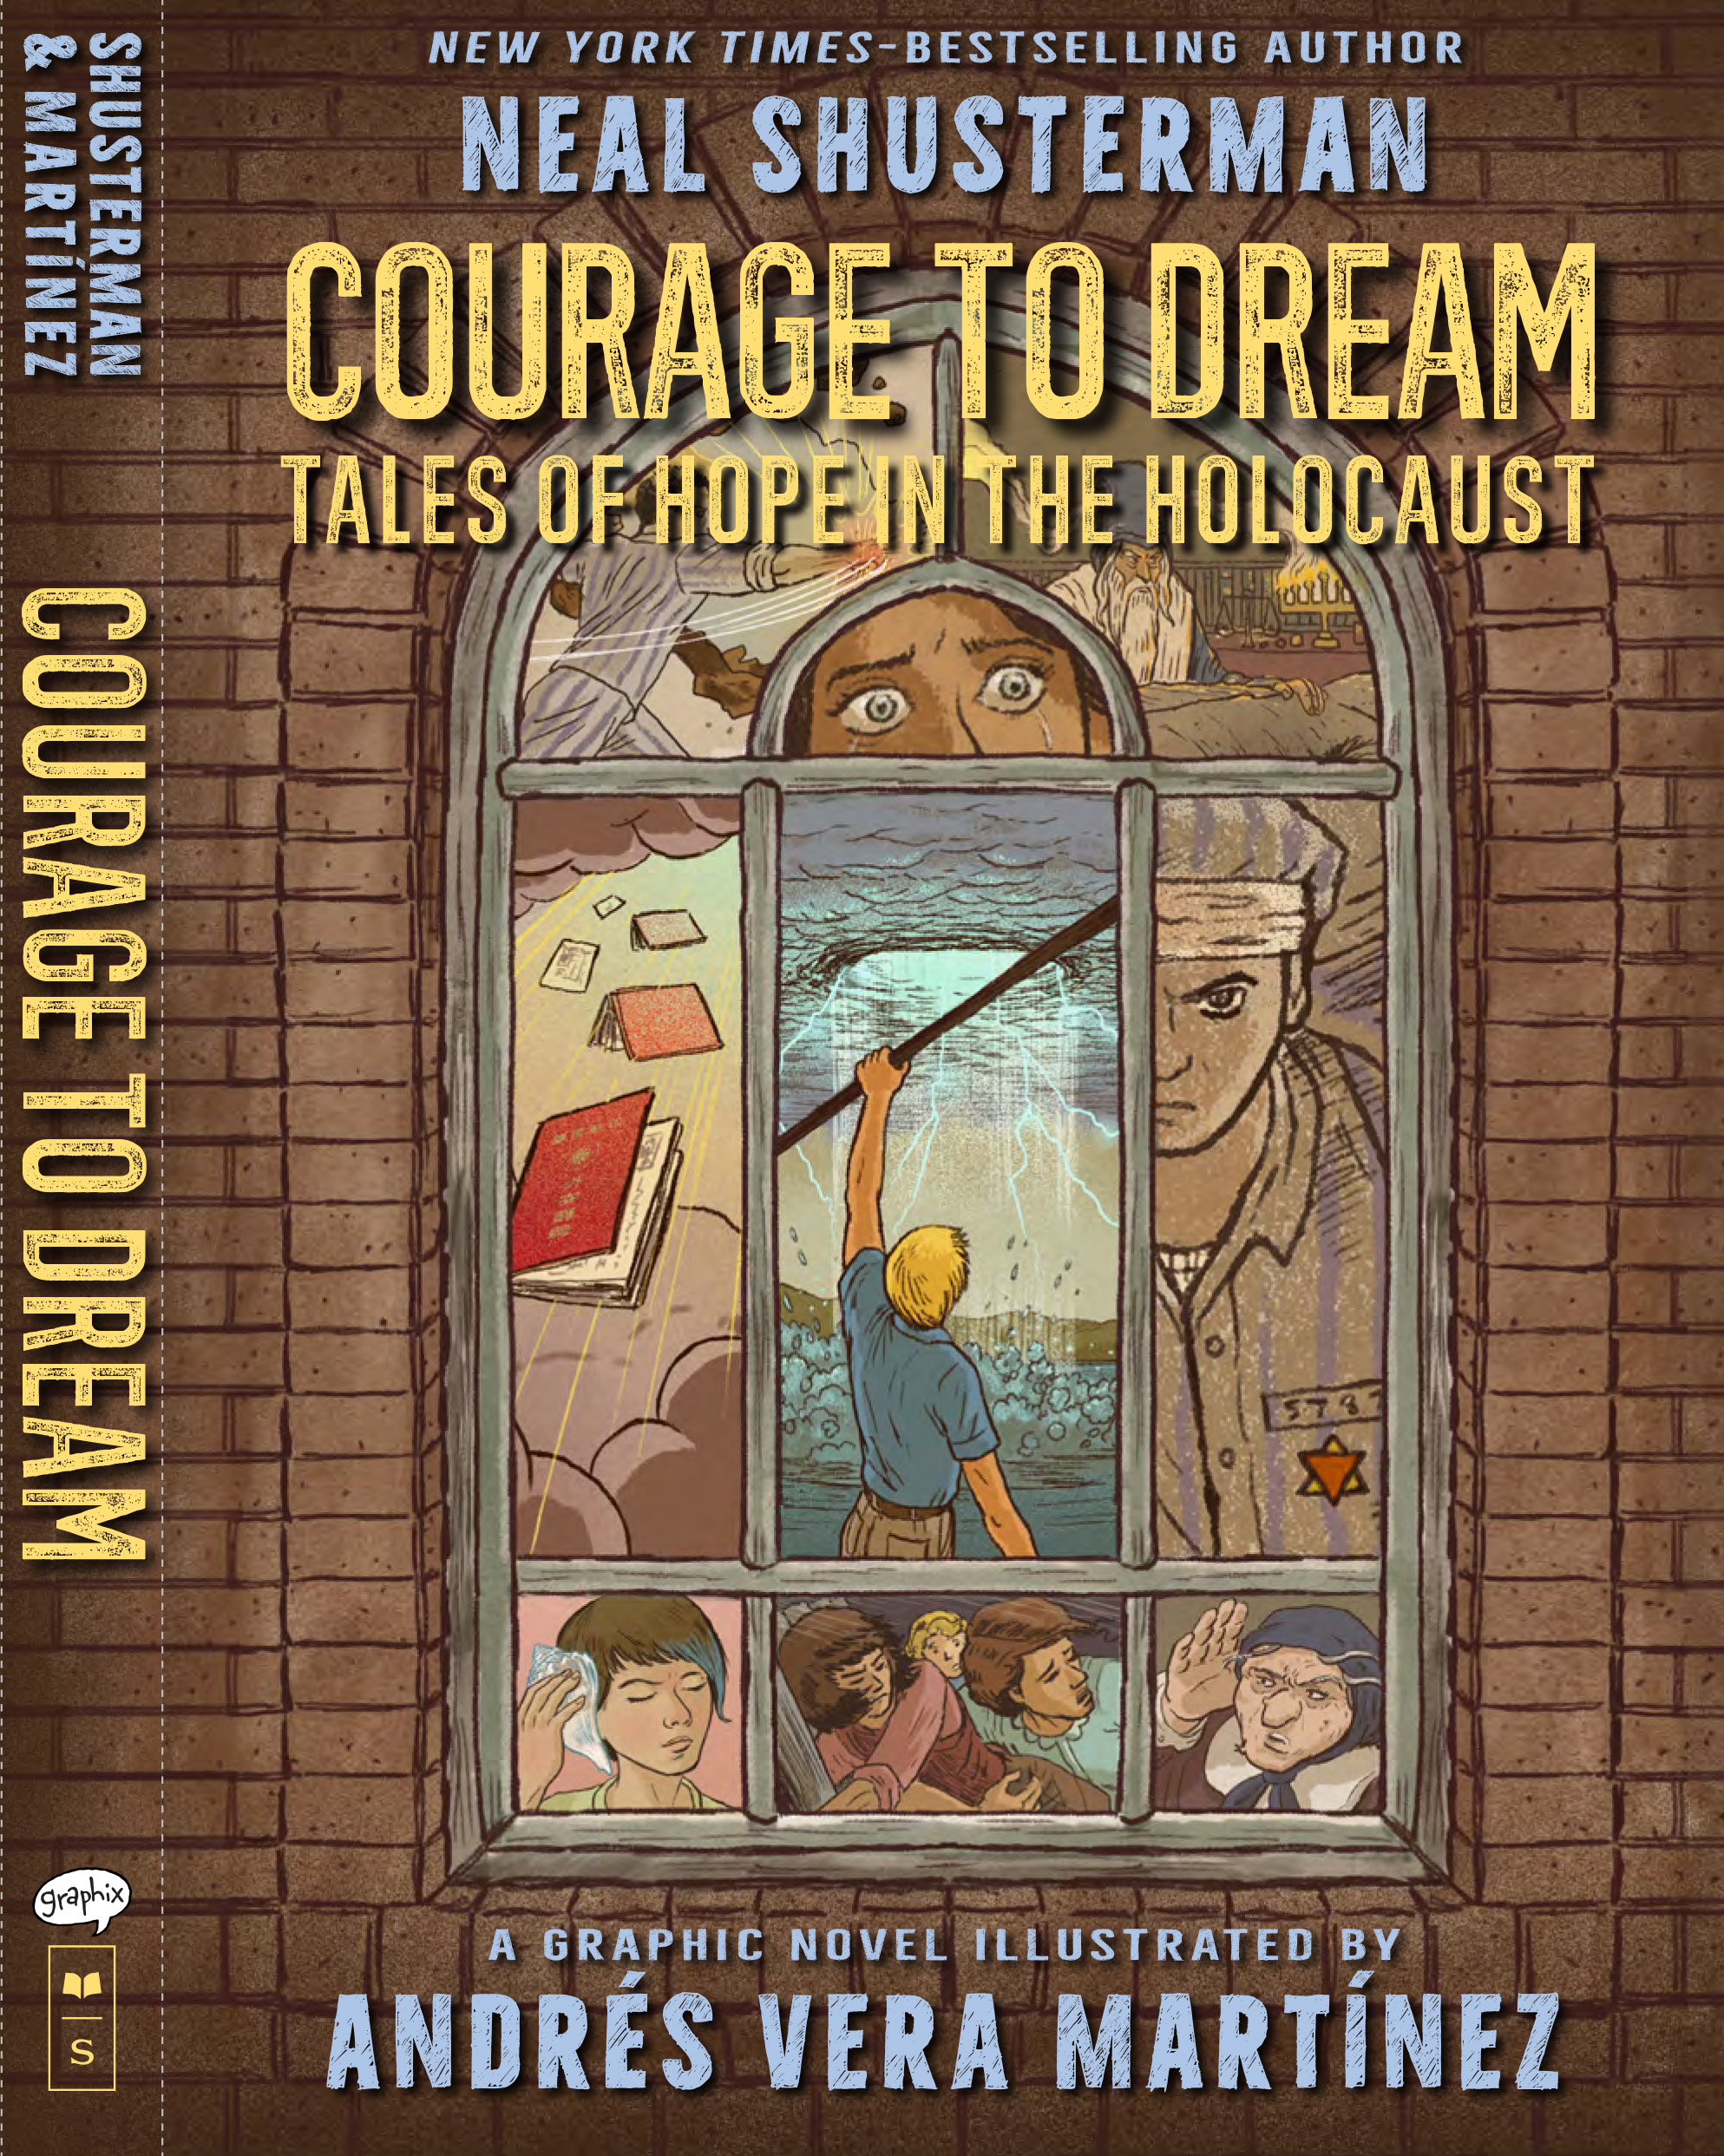 Cover image of Courage to Dream, by Neal Shusterman, illustrated by Andres Vera Martinez